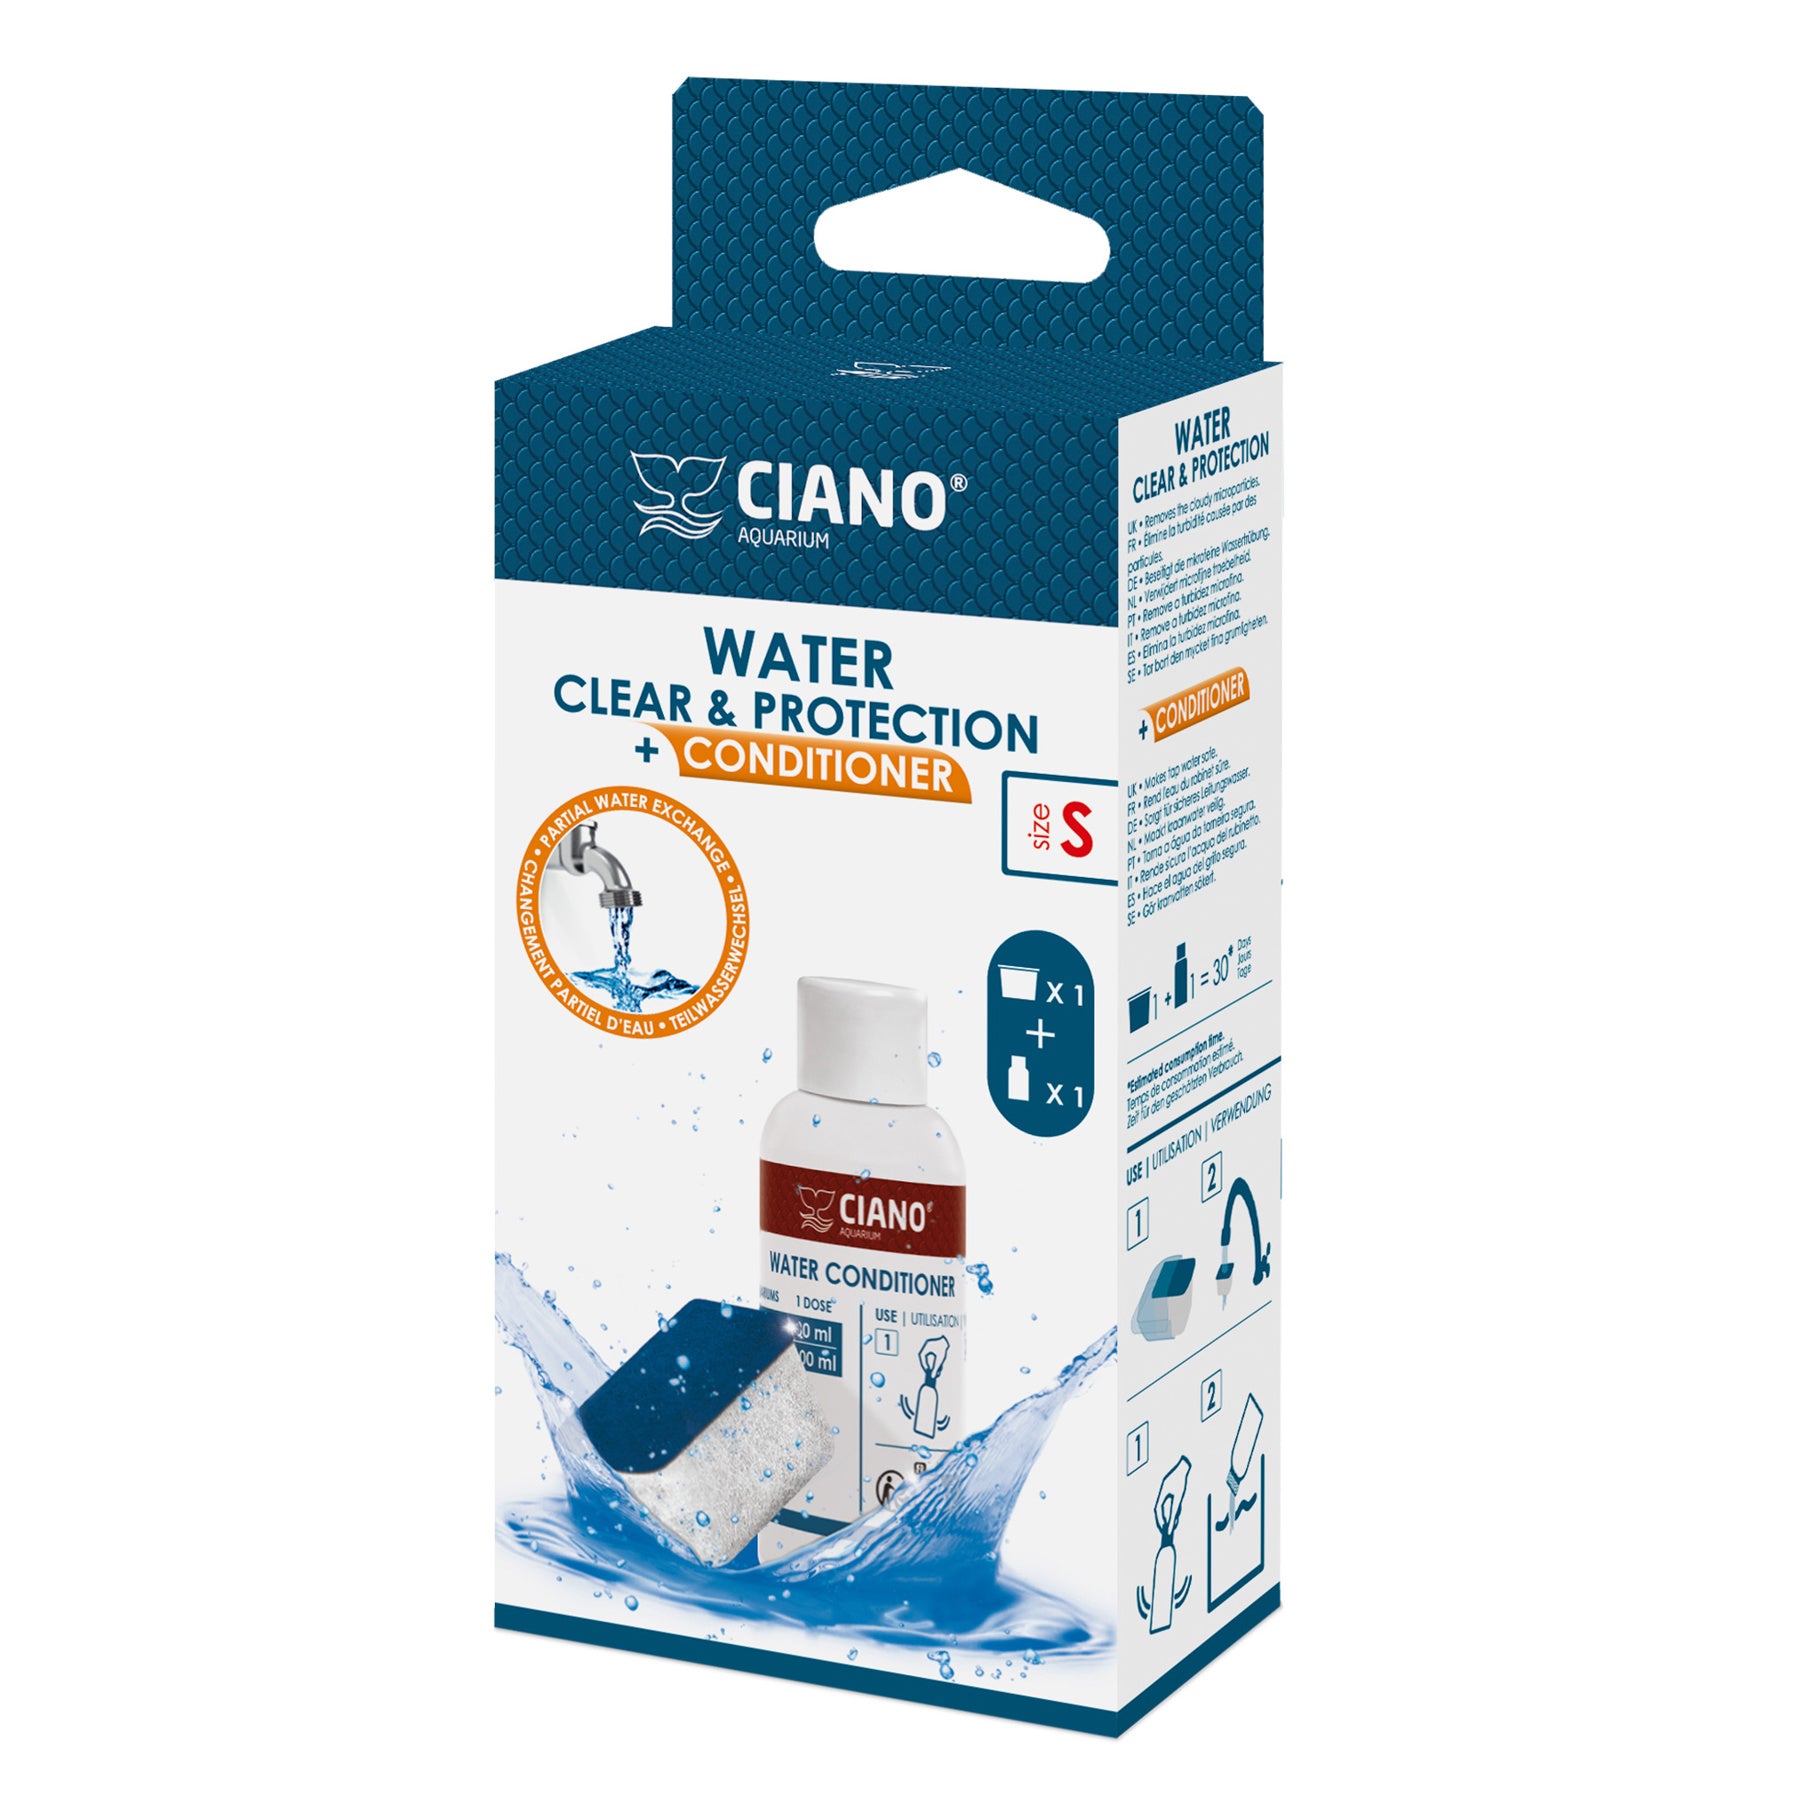 Ciano Water Clear & Protection & Conditioner 4 Sizes